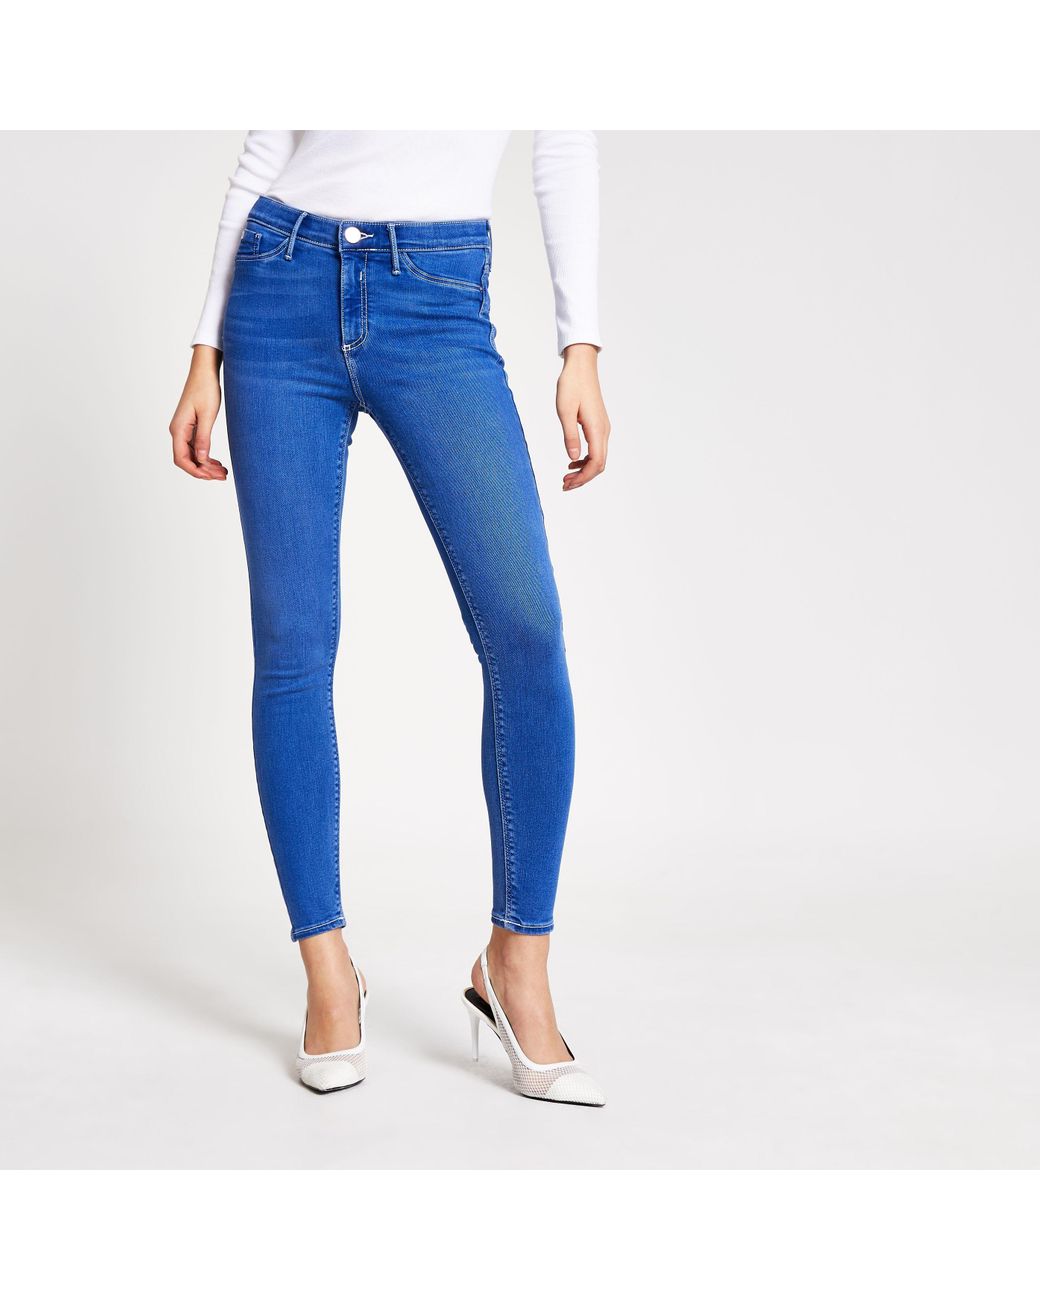 River Island Bright Blue Molly Mid Rise jeggings | Lyst Canada